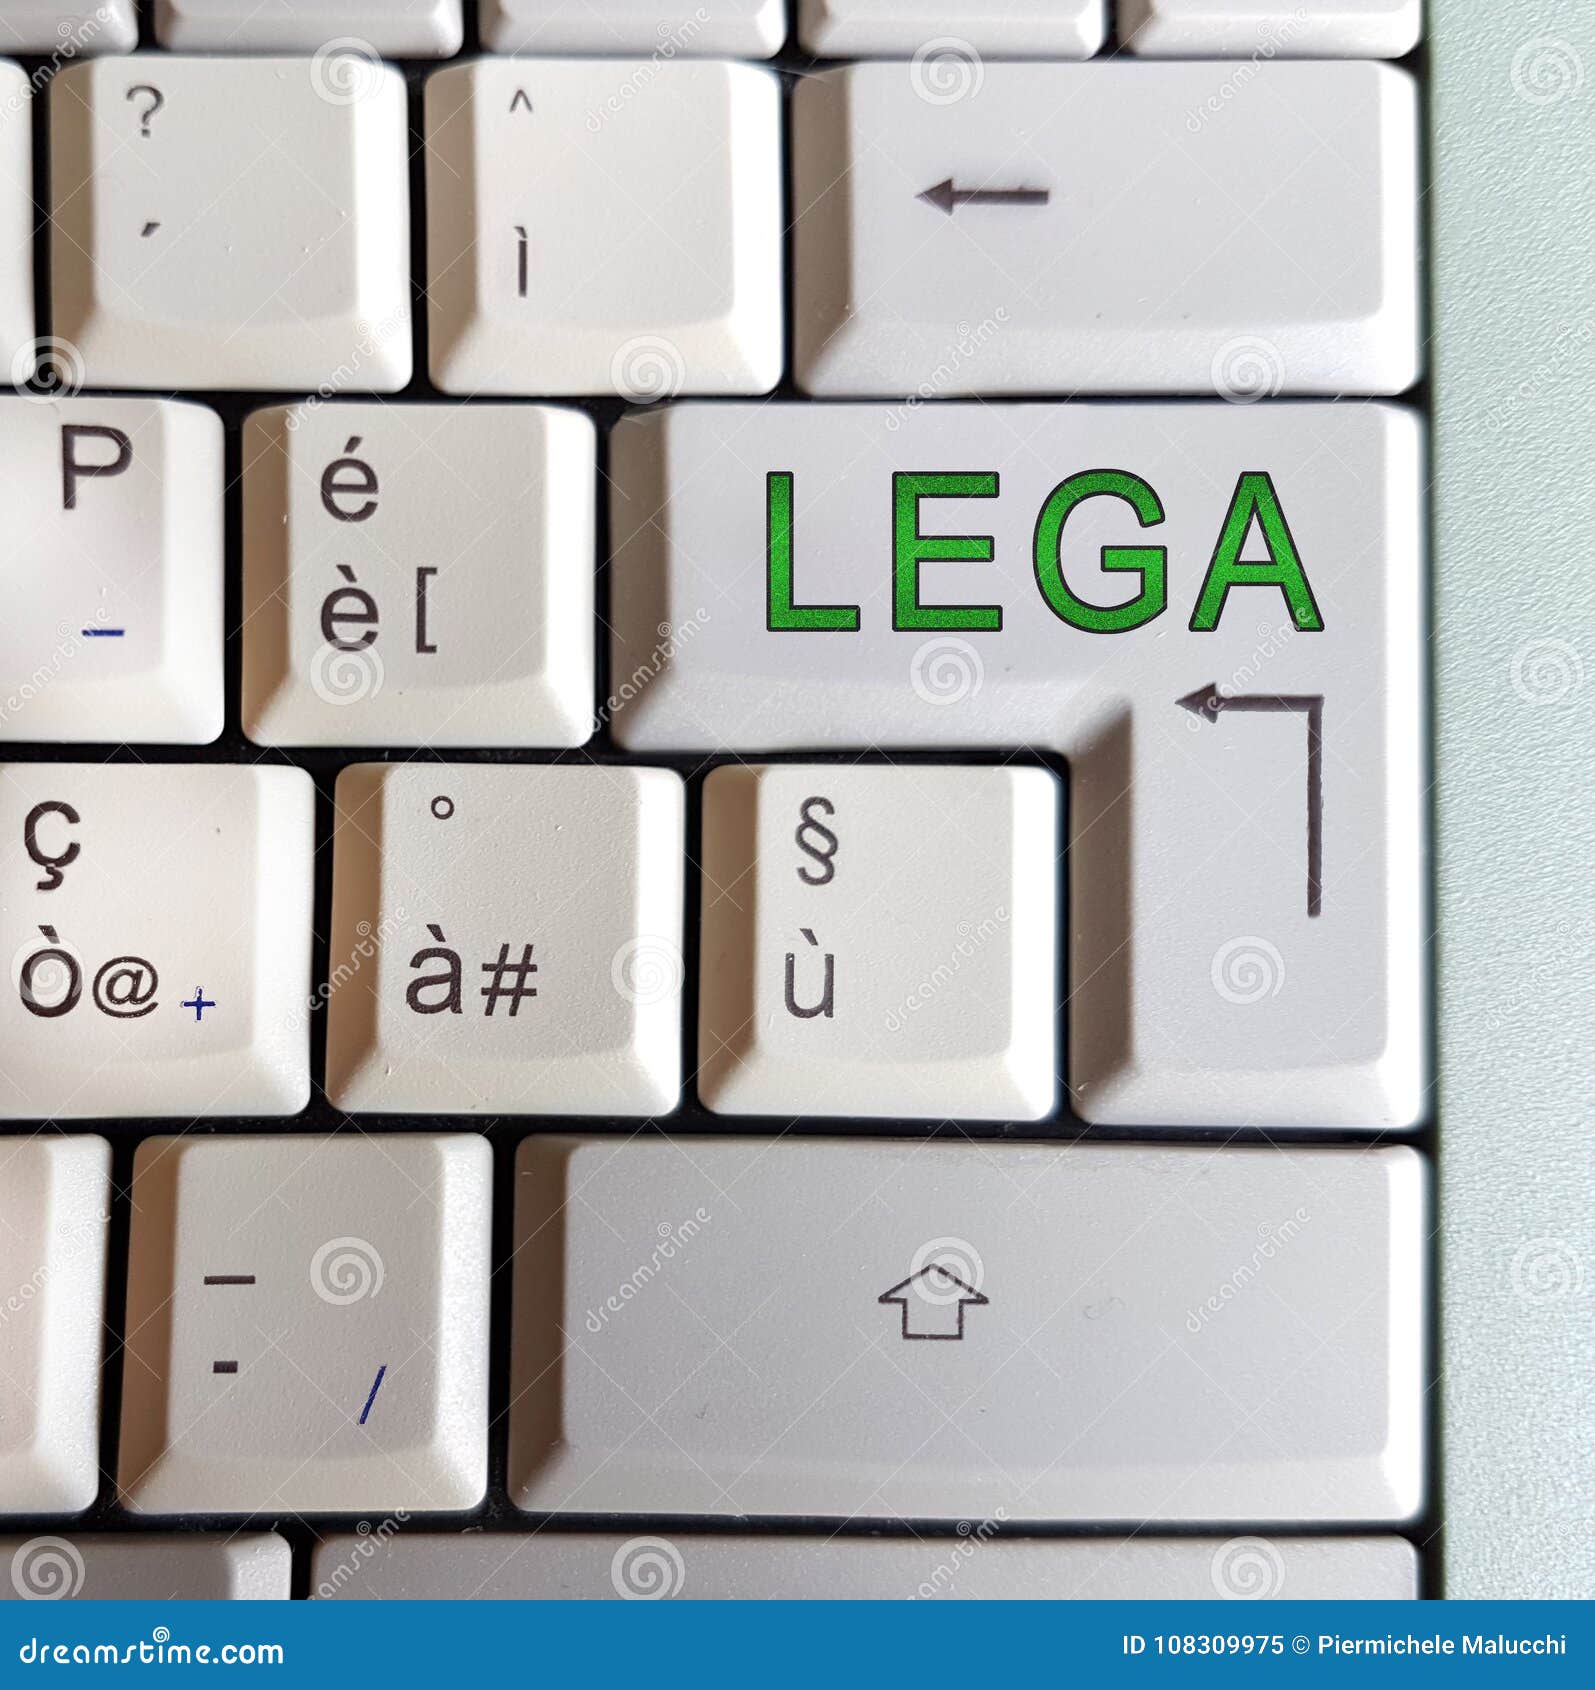 with the keyboard vote for the next elections in italy, vote leg